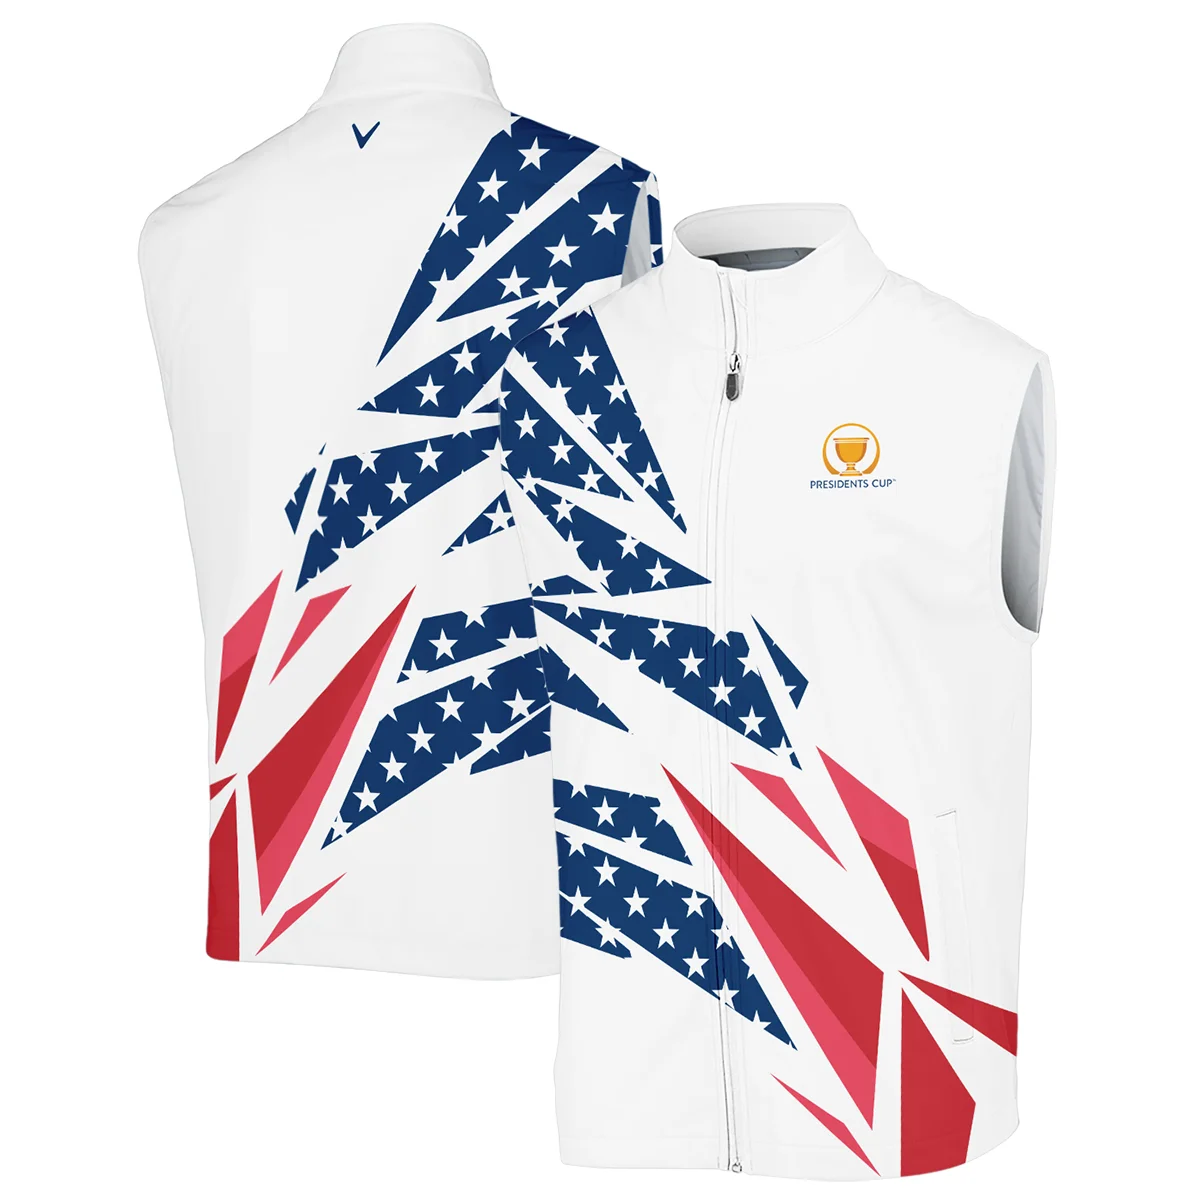 Flag American Cup Presidents Cup Callaway Performance T-Shirt All Over Prints QTPR2606A1CLWTS